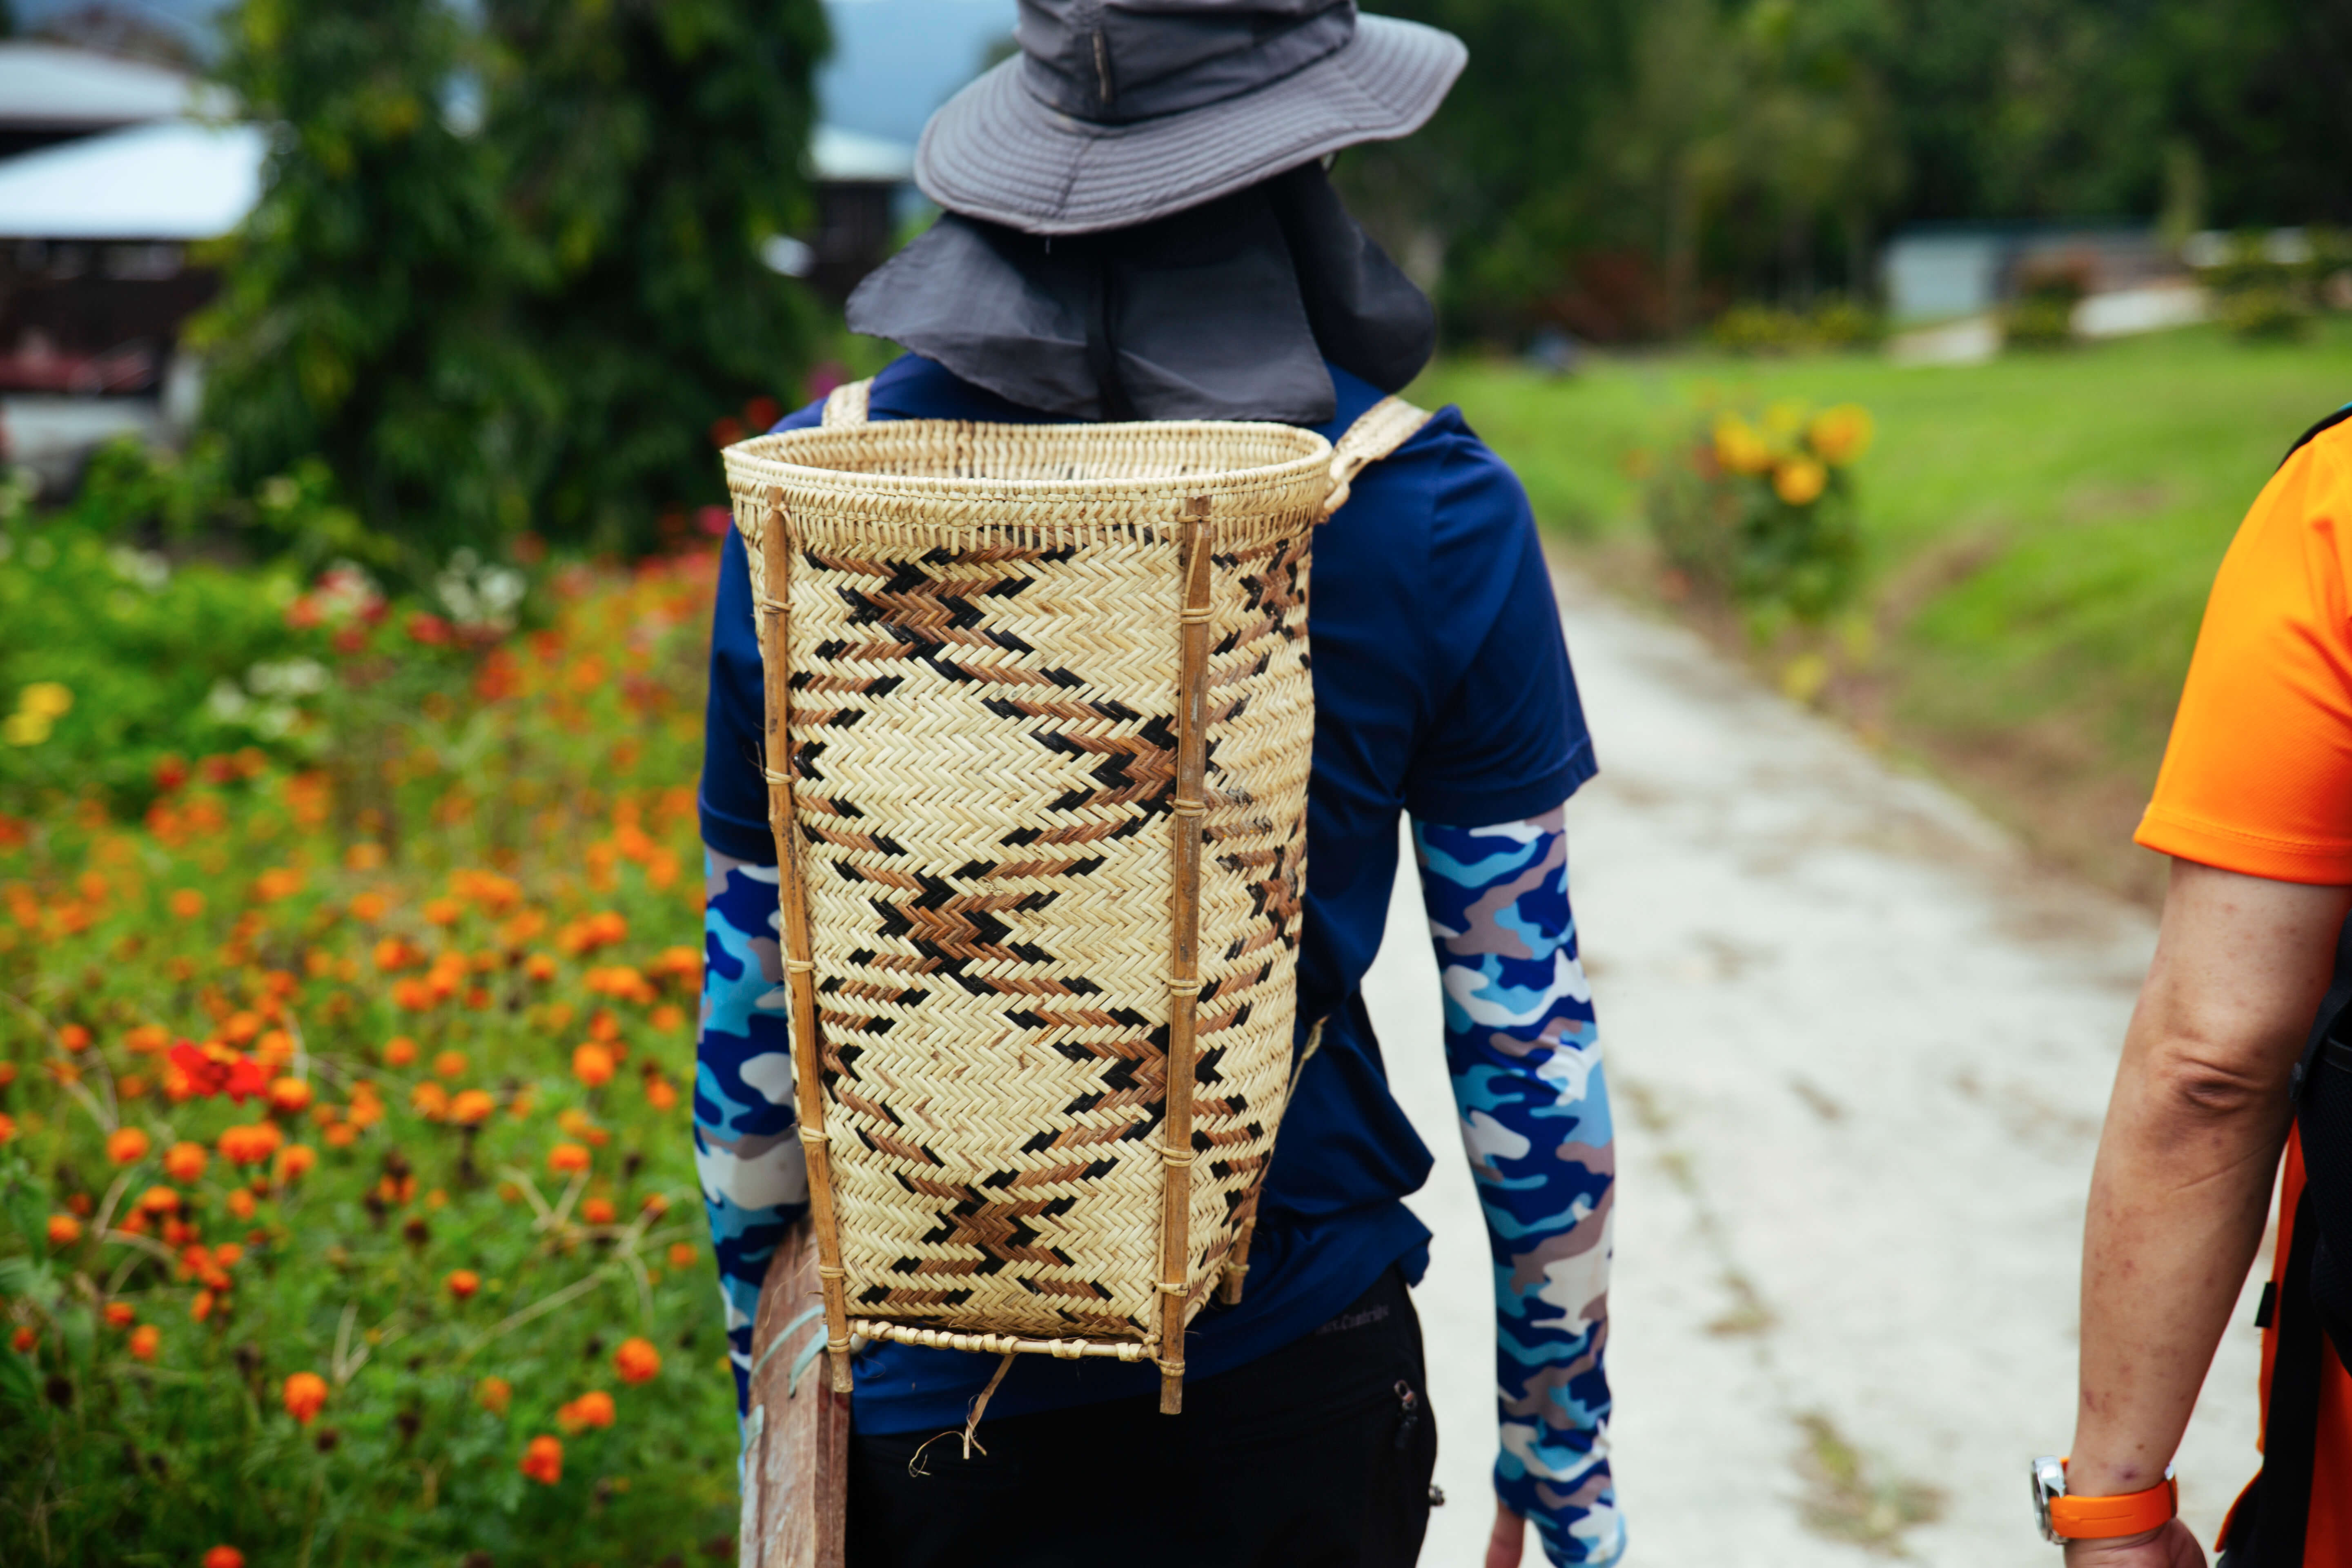 Back view of Zi carrying a basket woven with a criss-cross patten on his back. Farmers in Long Semadoh typically carry these hand-woven baskets called ren onto the fields 